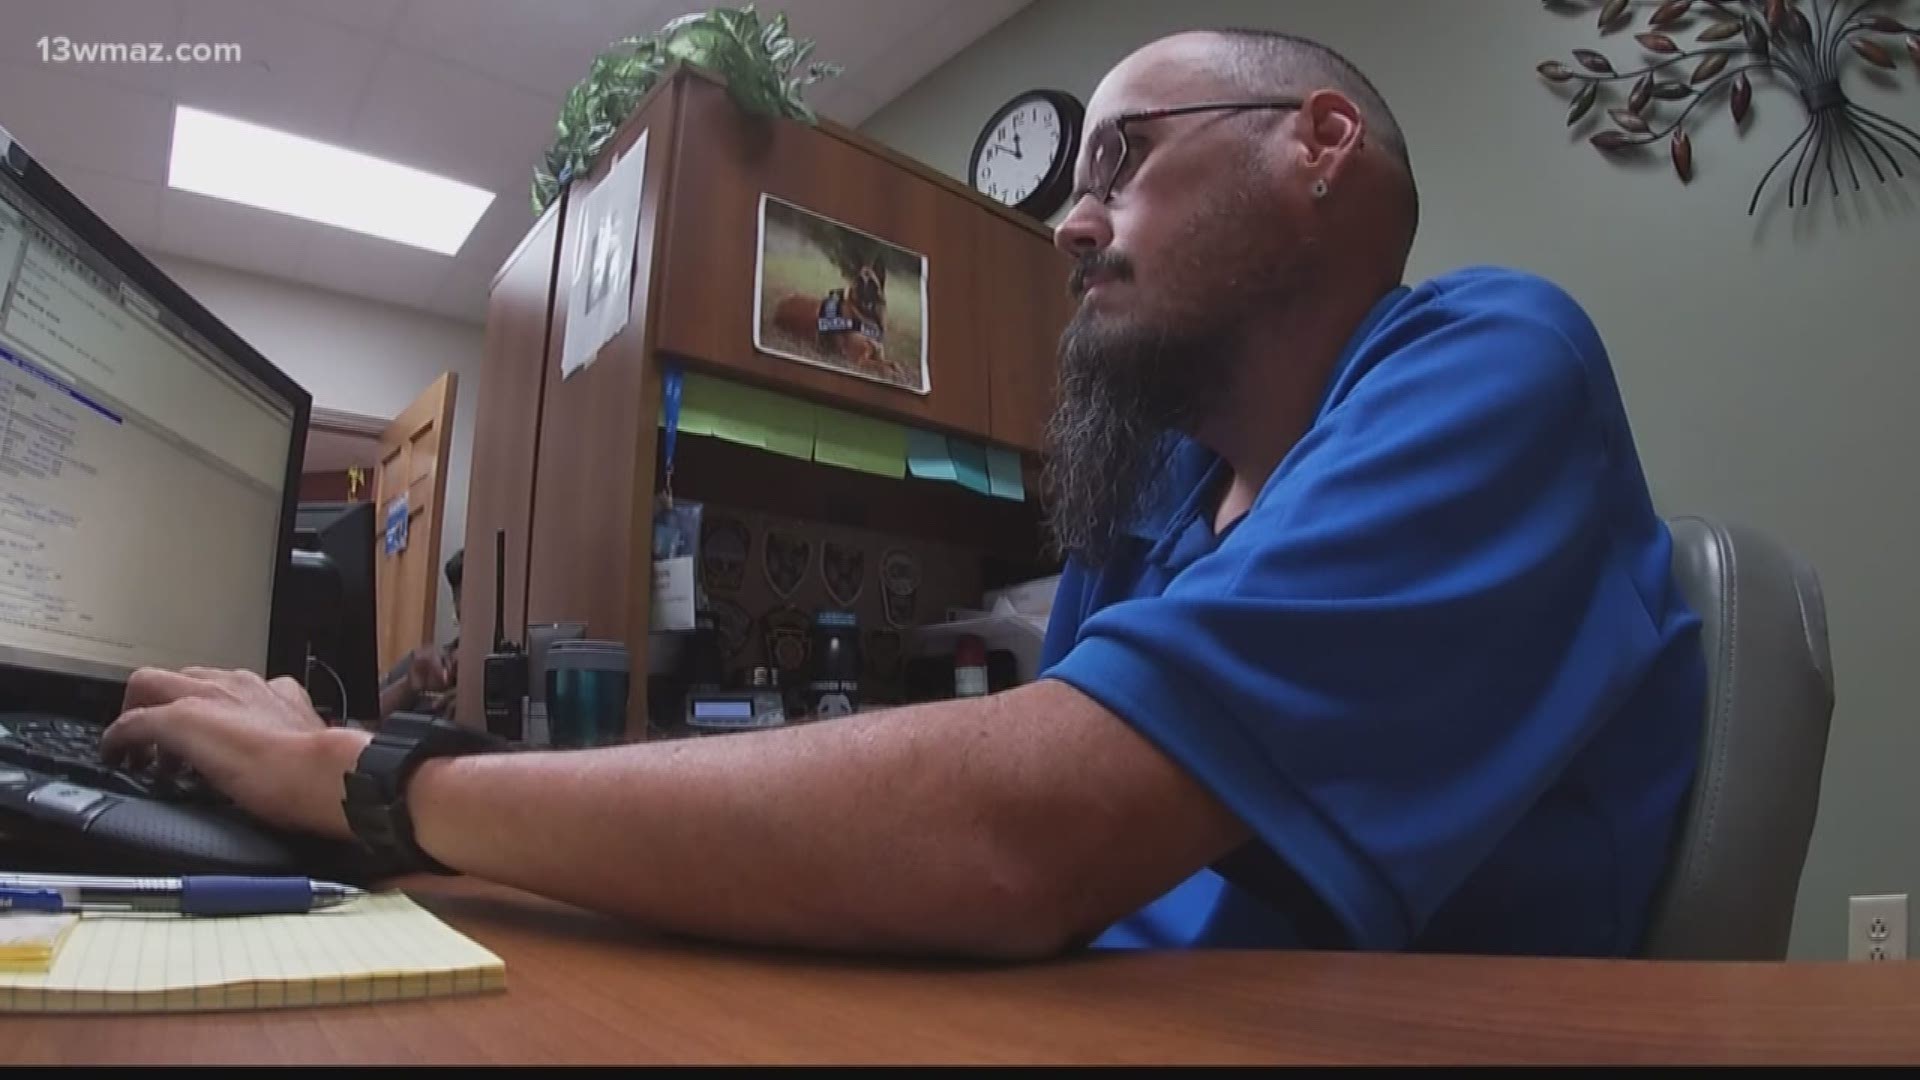 A year ago, a familiar face re-joined the Byron Police Department. Kevin Clance moved back to town to take care of his sister after she was injured in a car accident. Sarah Hammond shares Clance's inspiring story and why he says he just wants to help people.